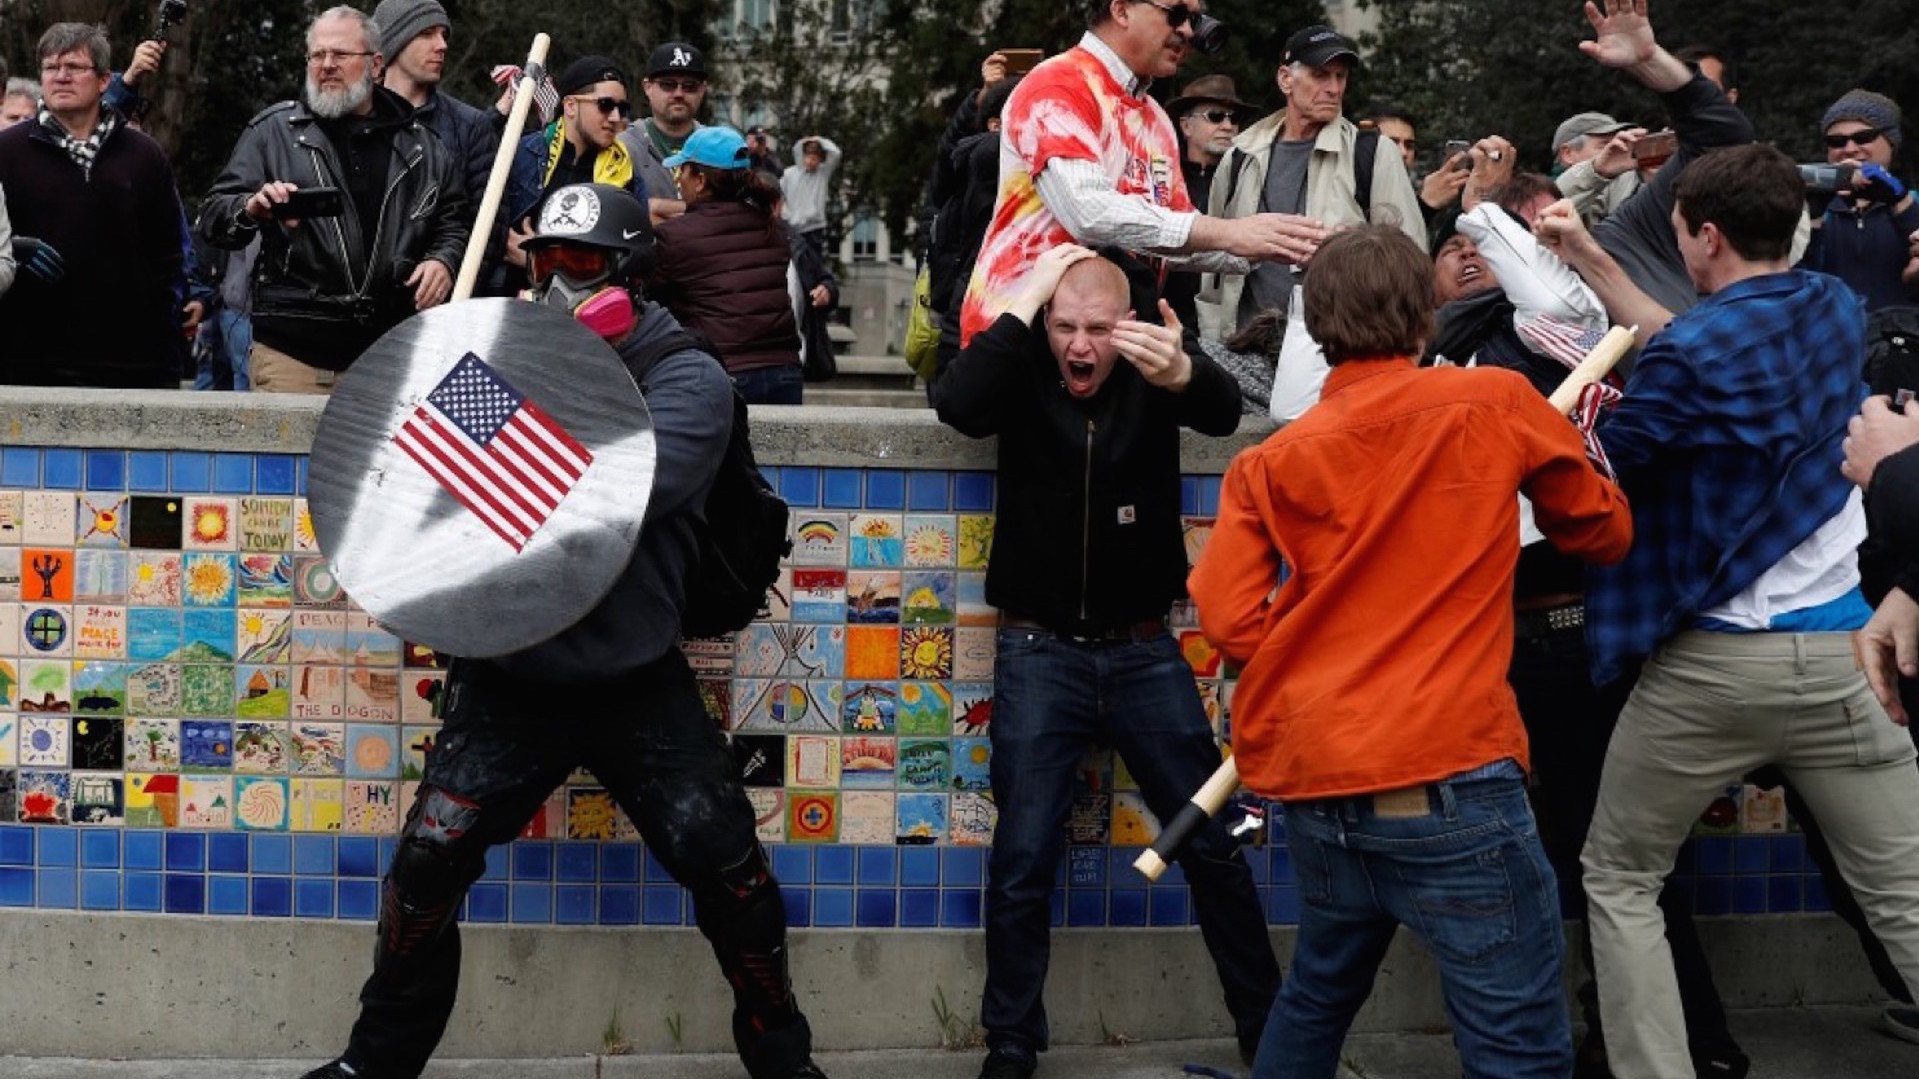 Pro-Trump rally in Berkeley turns violent as protesters clash with the president's supporters - The Washington